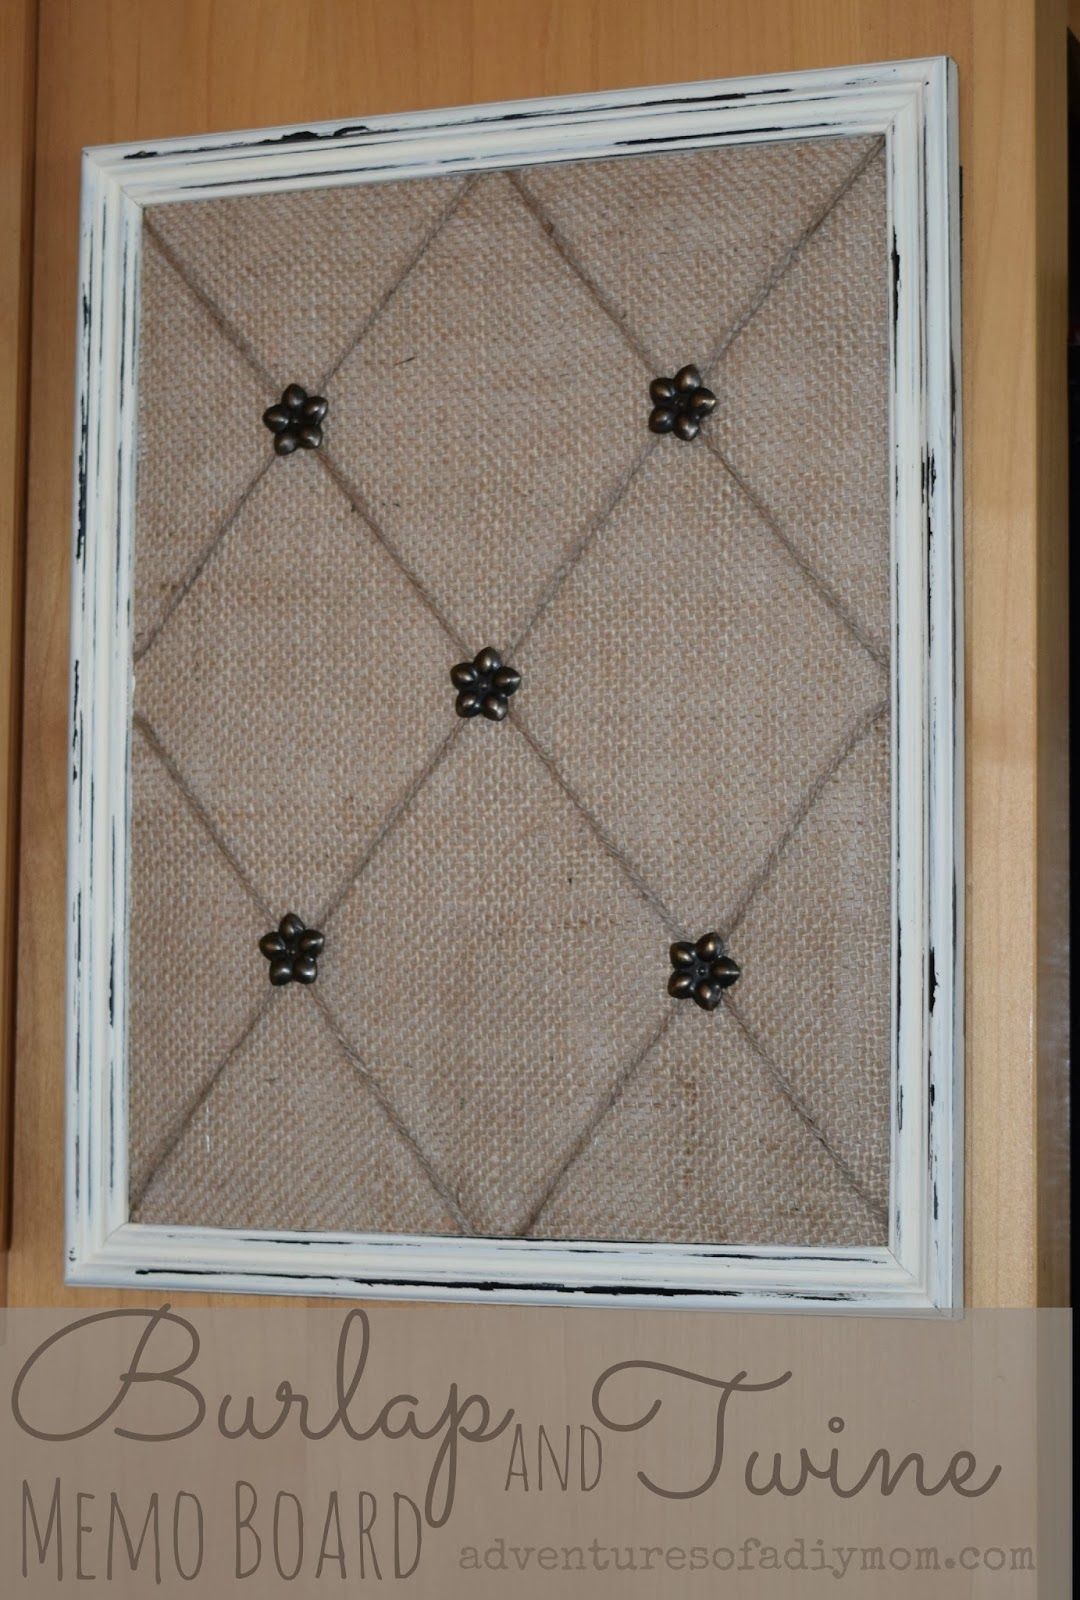 How to Make a Burlap and Twine Memo Board -   25 burlap crafts board
 ideas